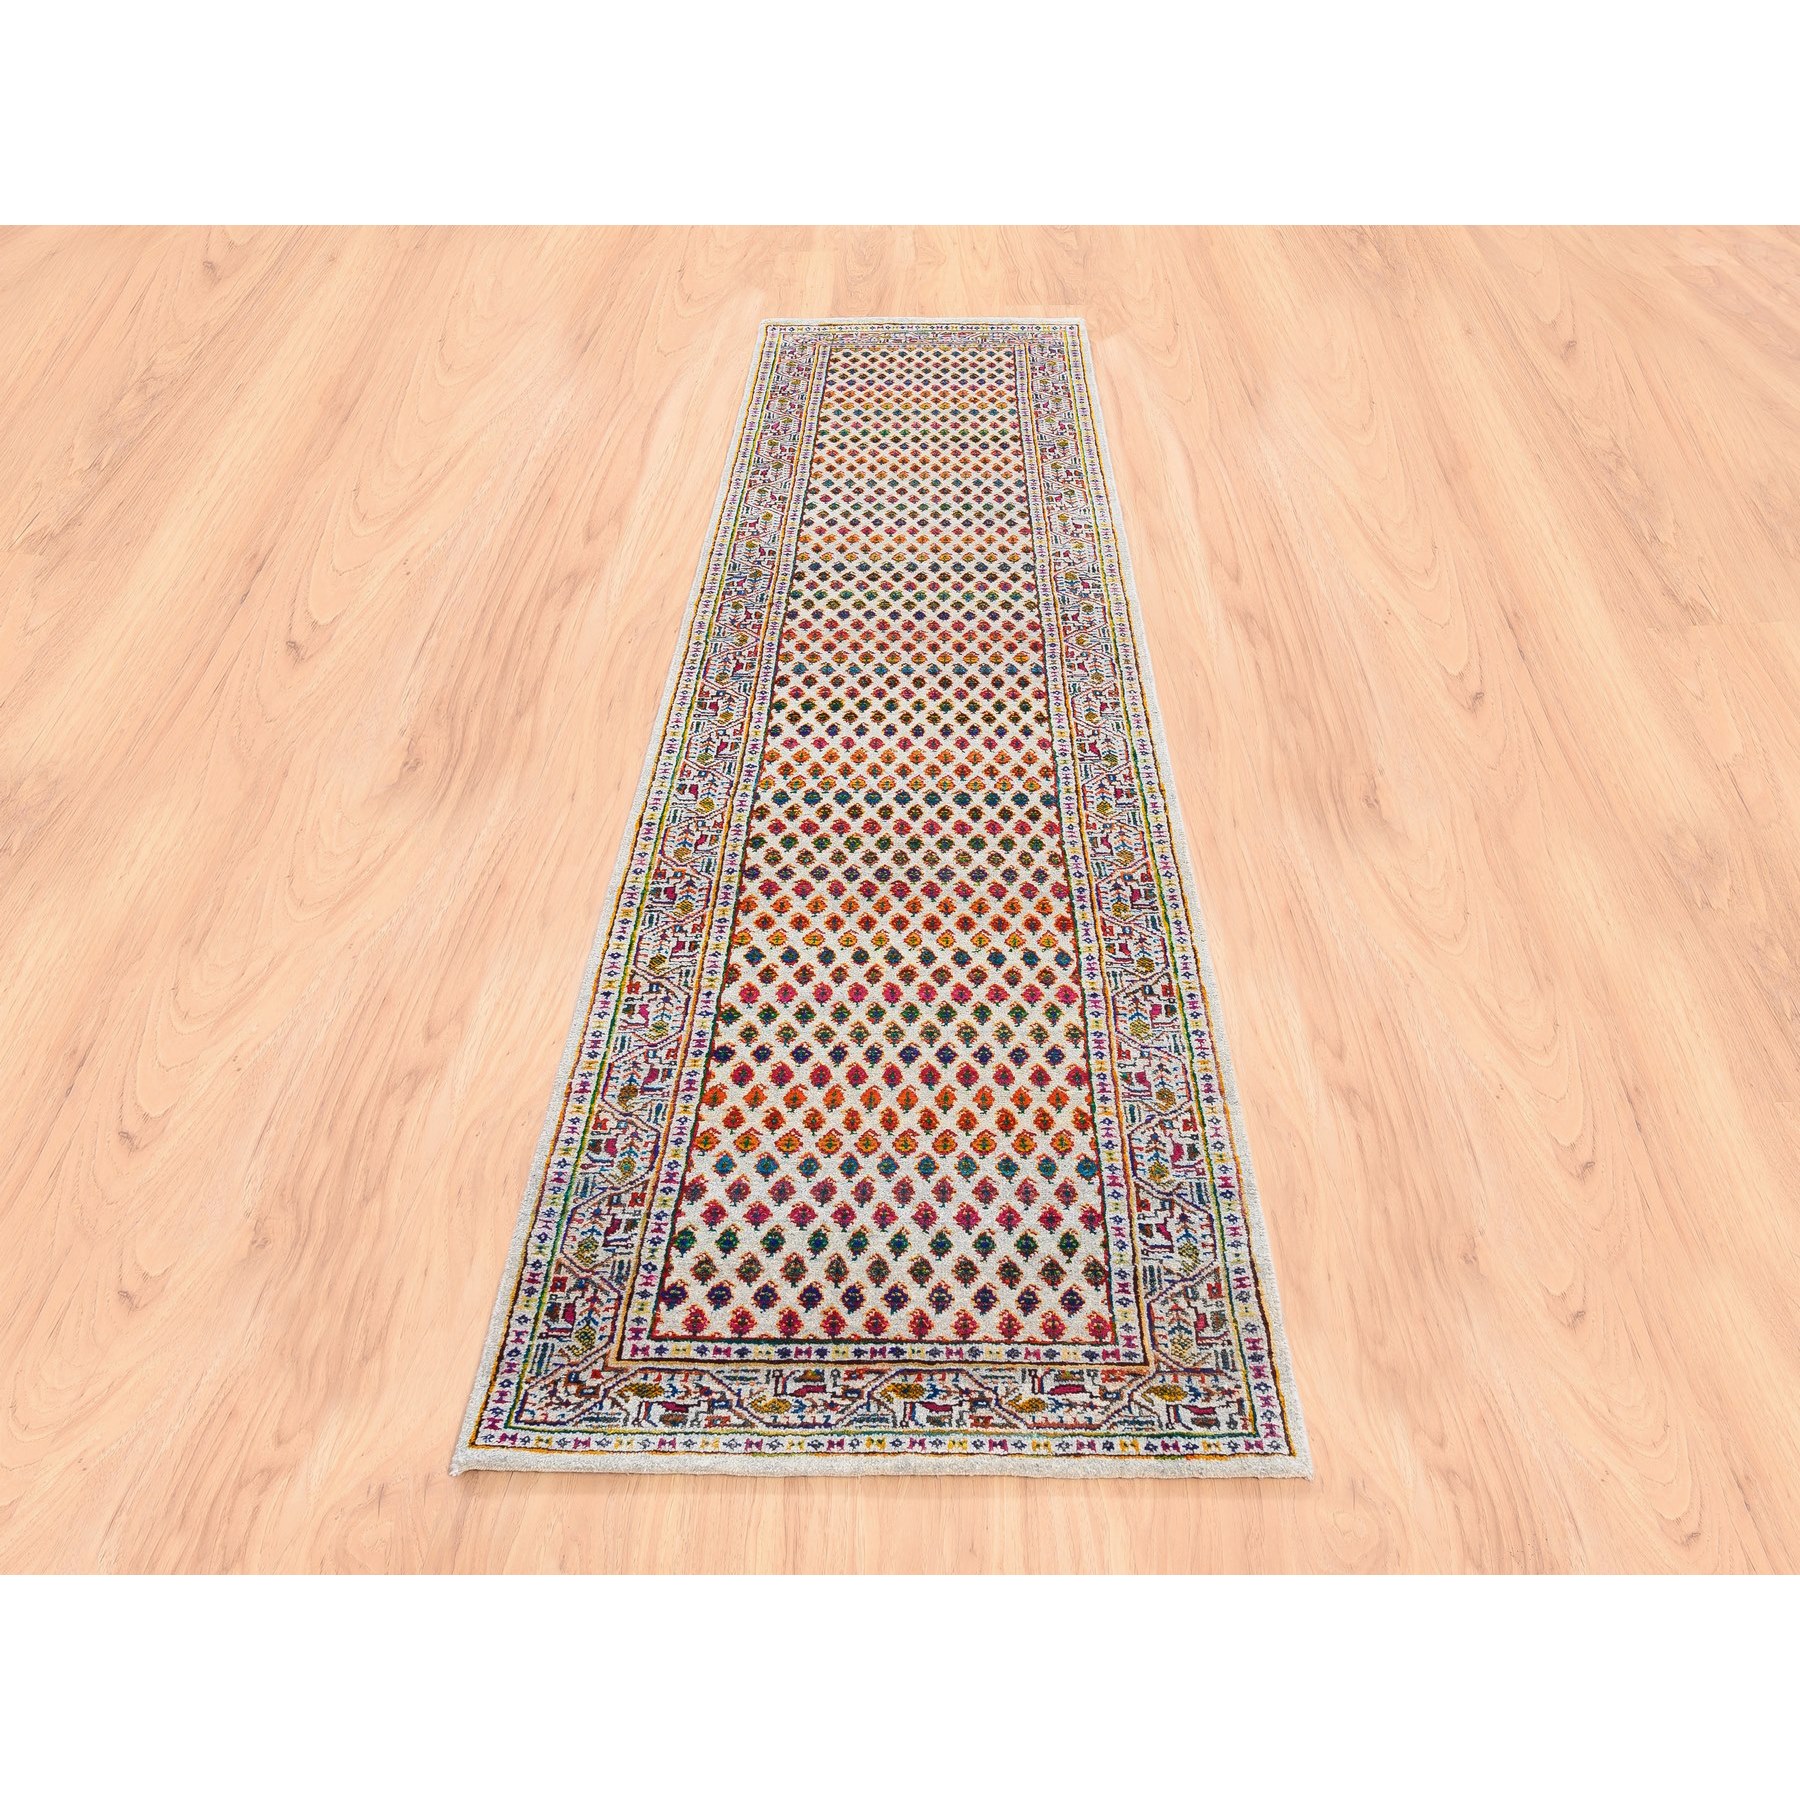 2'4"x10'2" Colorful Wool And Sari Silk Sarouk Mir Inspired With Multiple Borders Hand Woven Oriental Runner Rug 